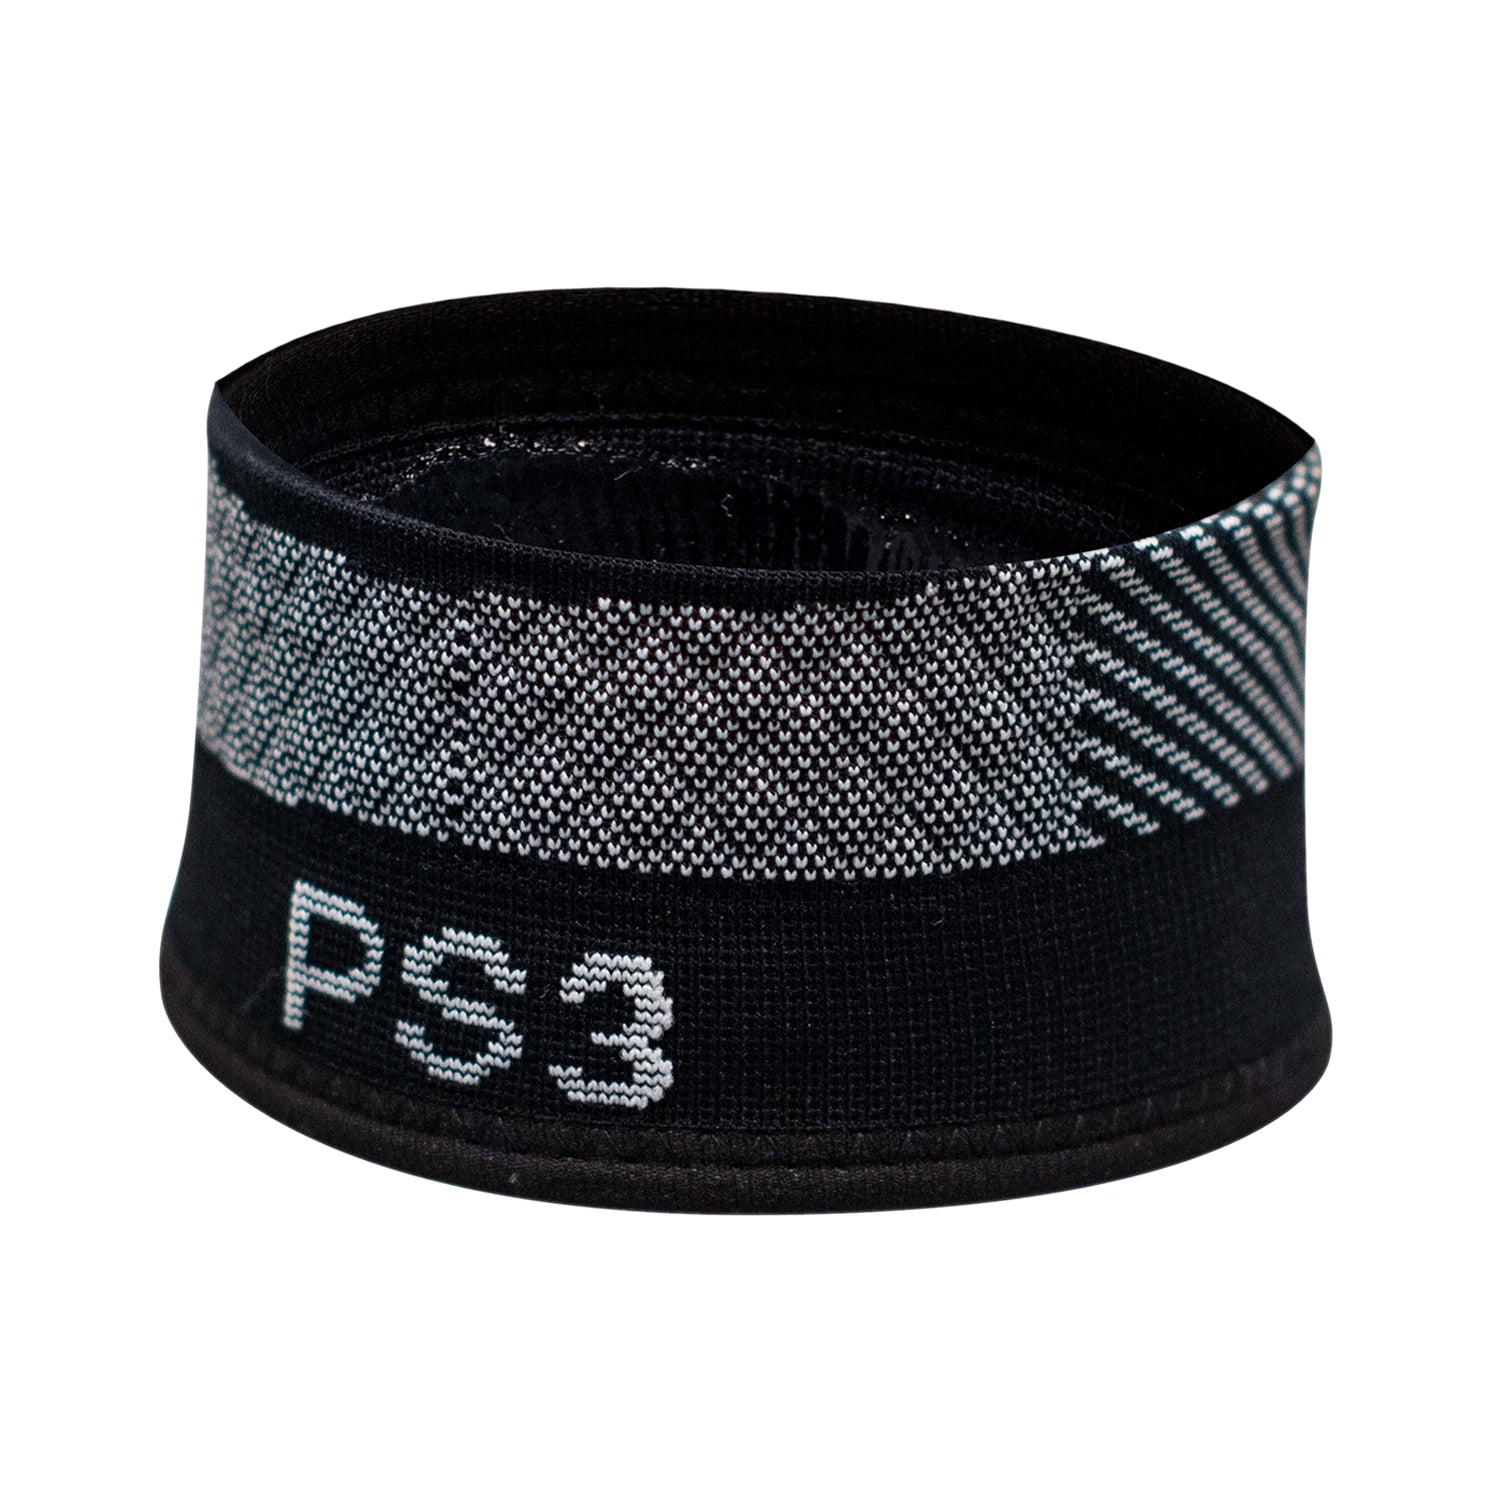 PS3 performance patella sleeve side view | OS1st